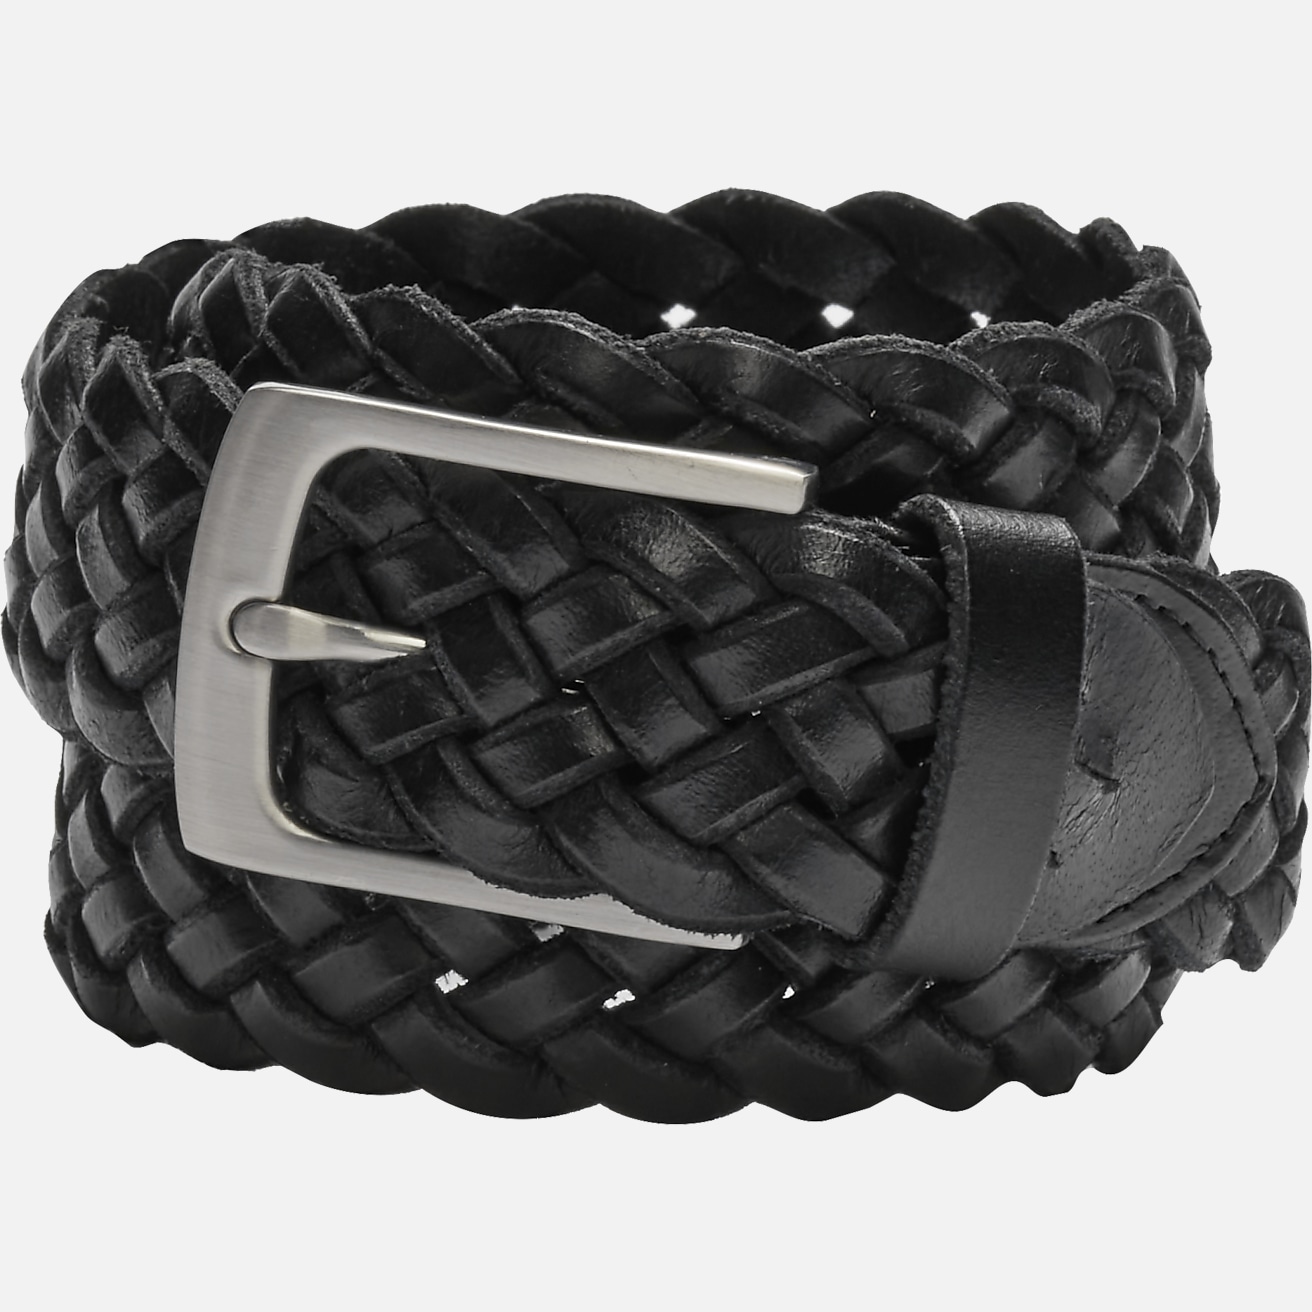 Men Braided Leather Belts - Buy Men Braided Leather Belts online in India